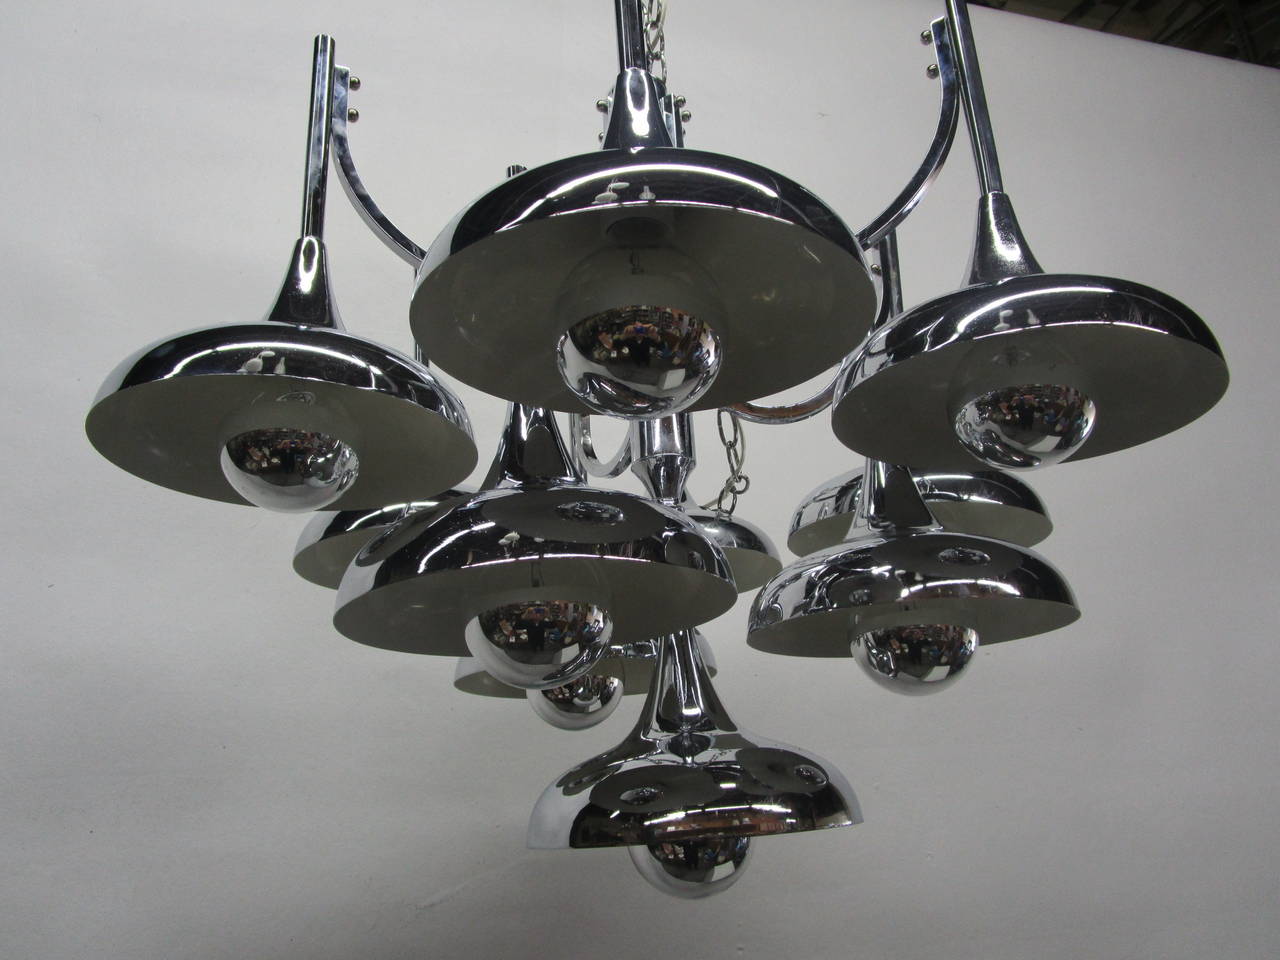 This chrome chandelier features ten bell trumpet shaped lights. The chrome-crown bulbs give a very warm and consistent light without hurting your eyes!
The chandelier height is 26